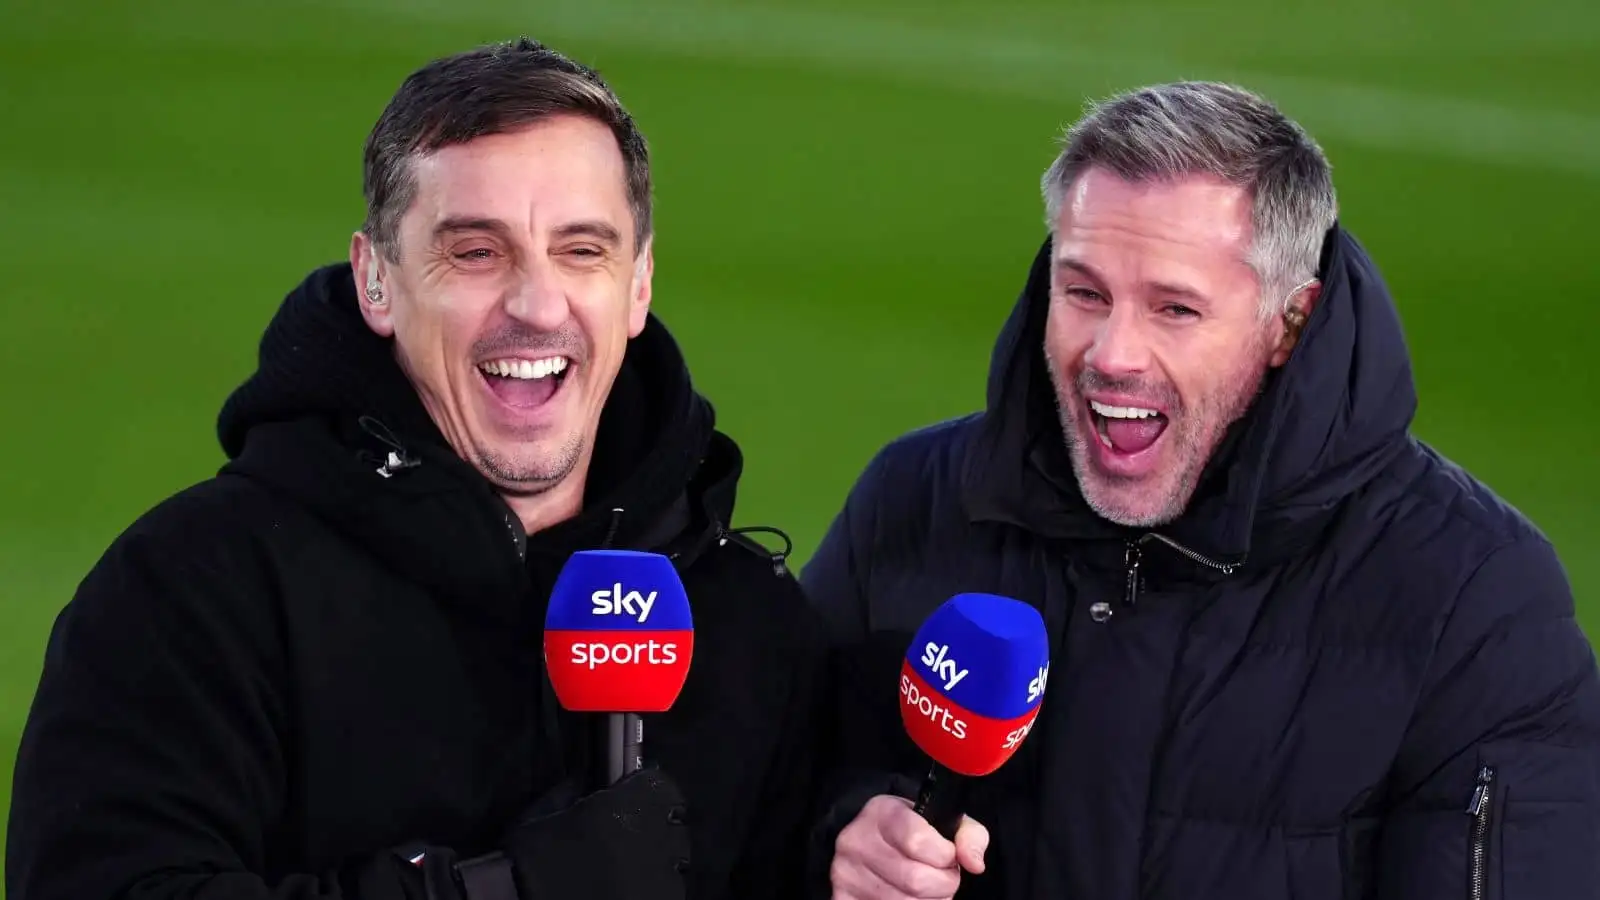 Gary Neville and Jamie Carragher, Sky Sports pundits